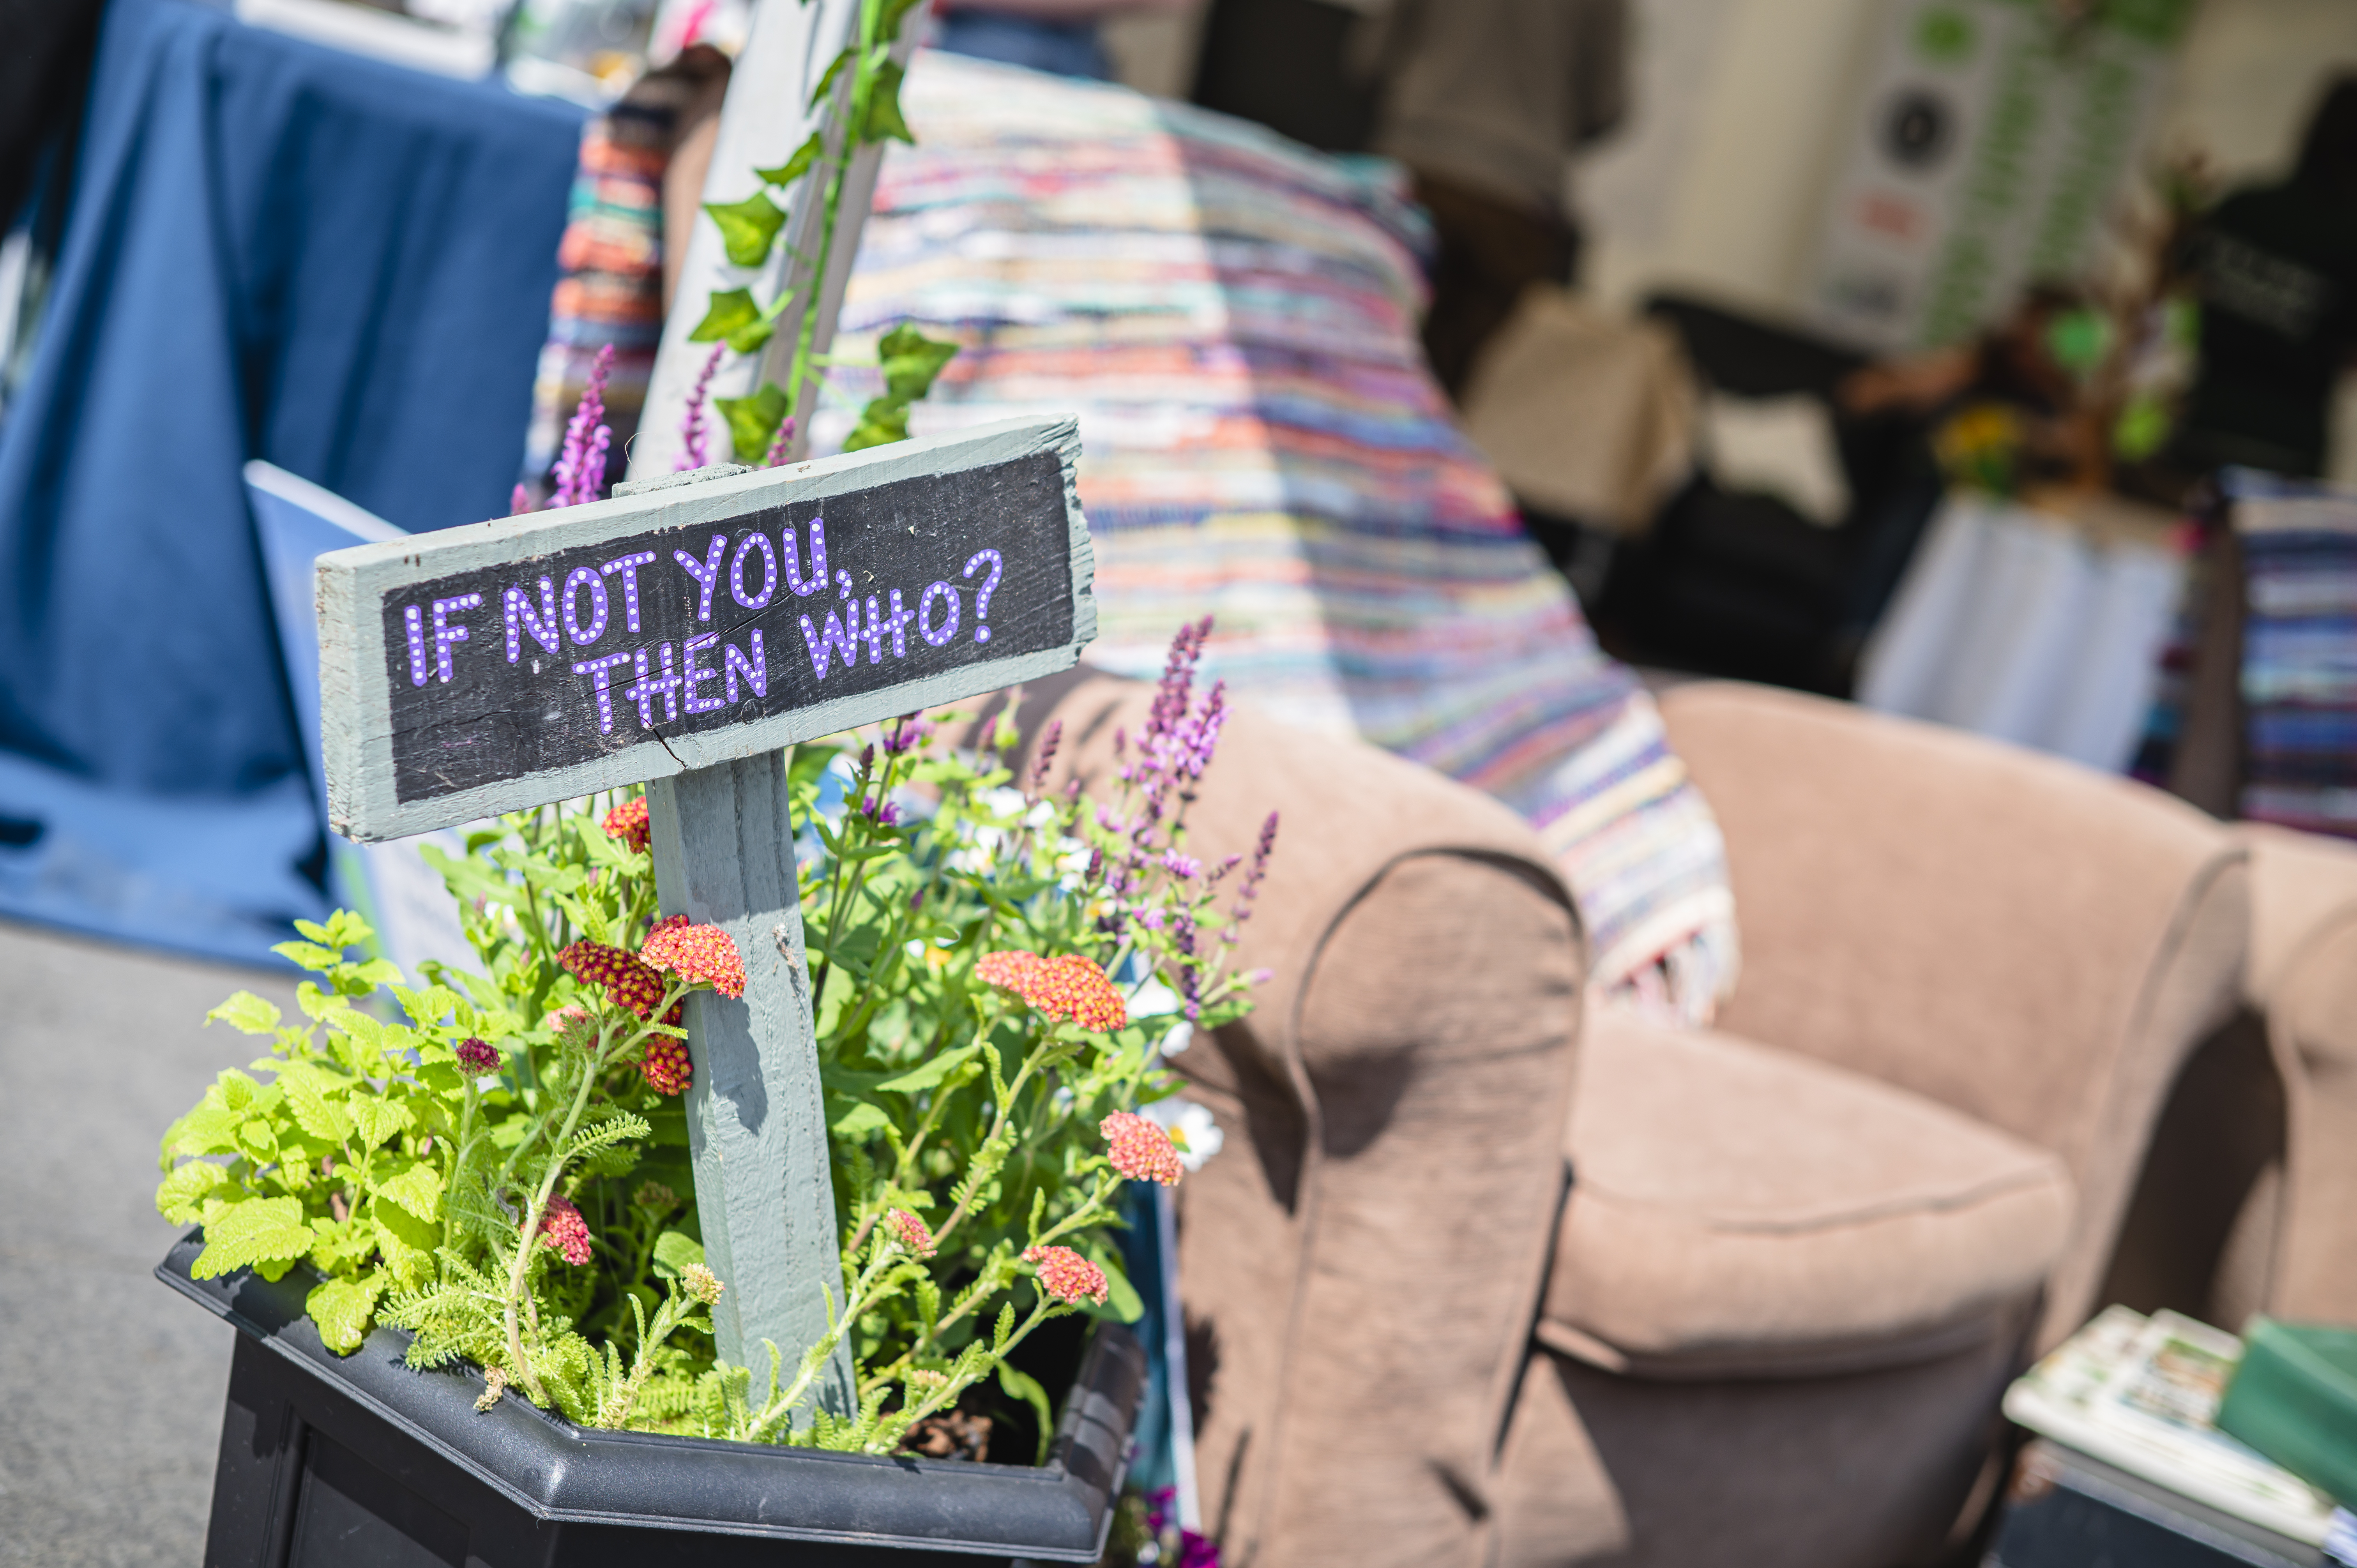 Image of planter at Green Hustle with a sign saying If not you, then who